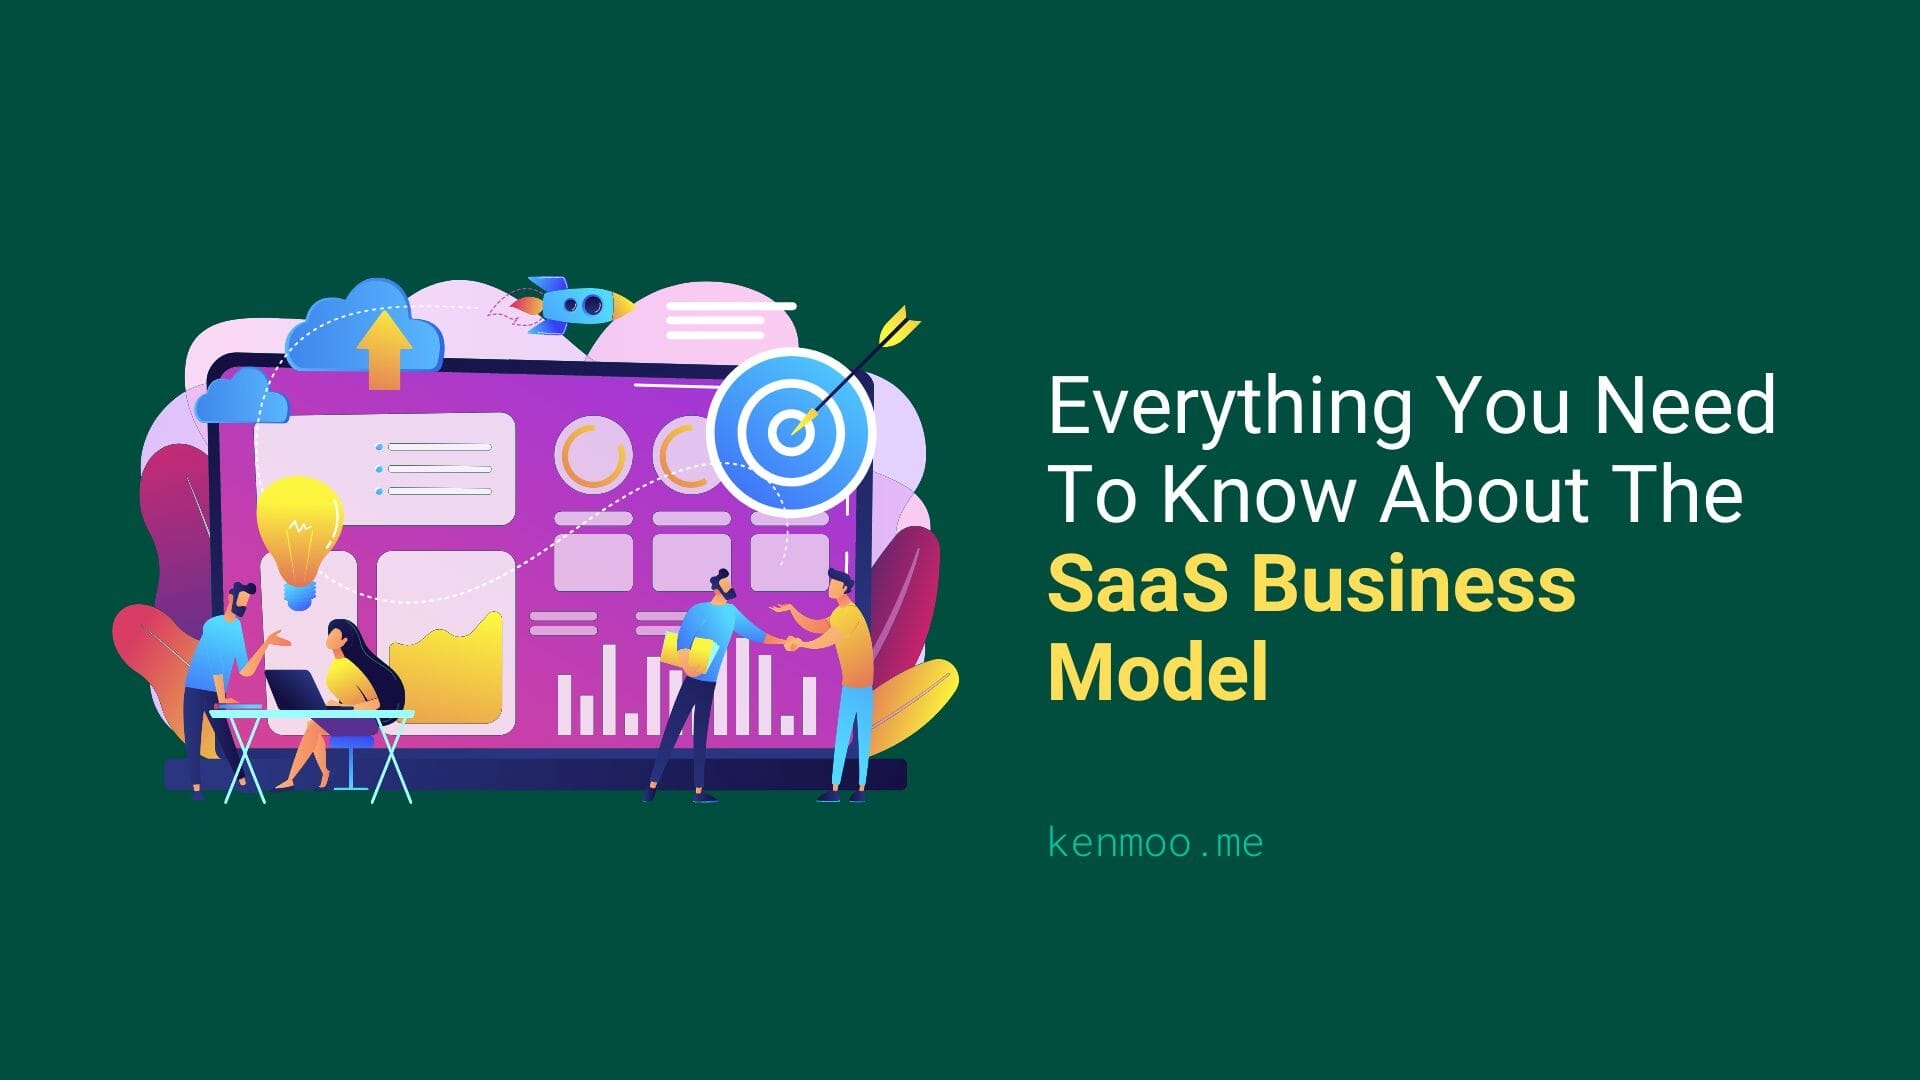 Everything You Need To Know About The SaaS Business Model